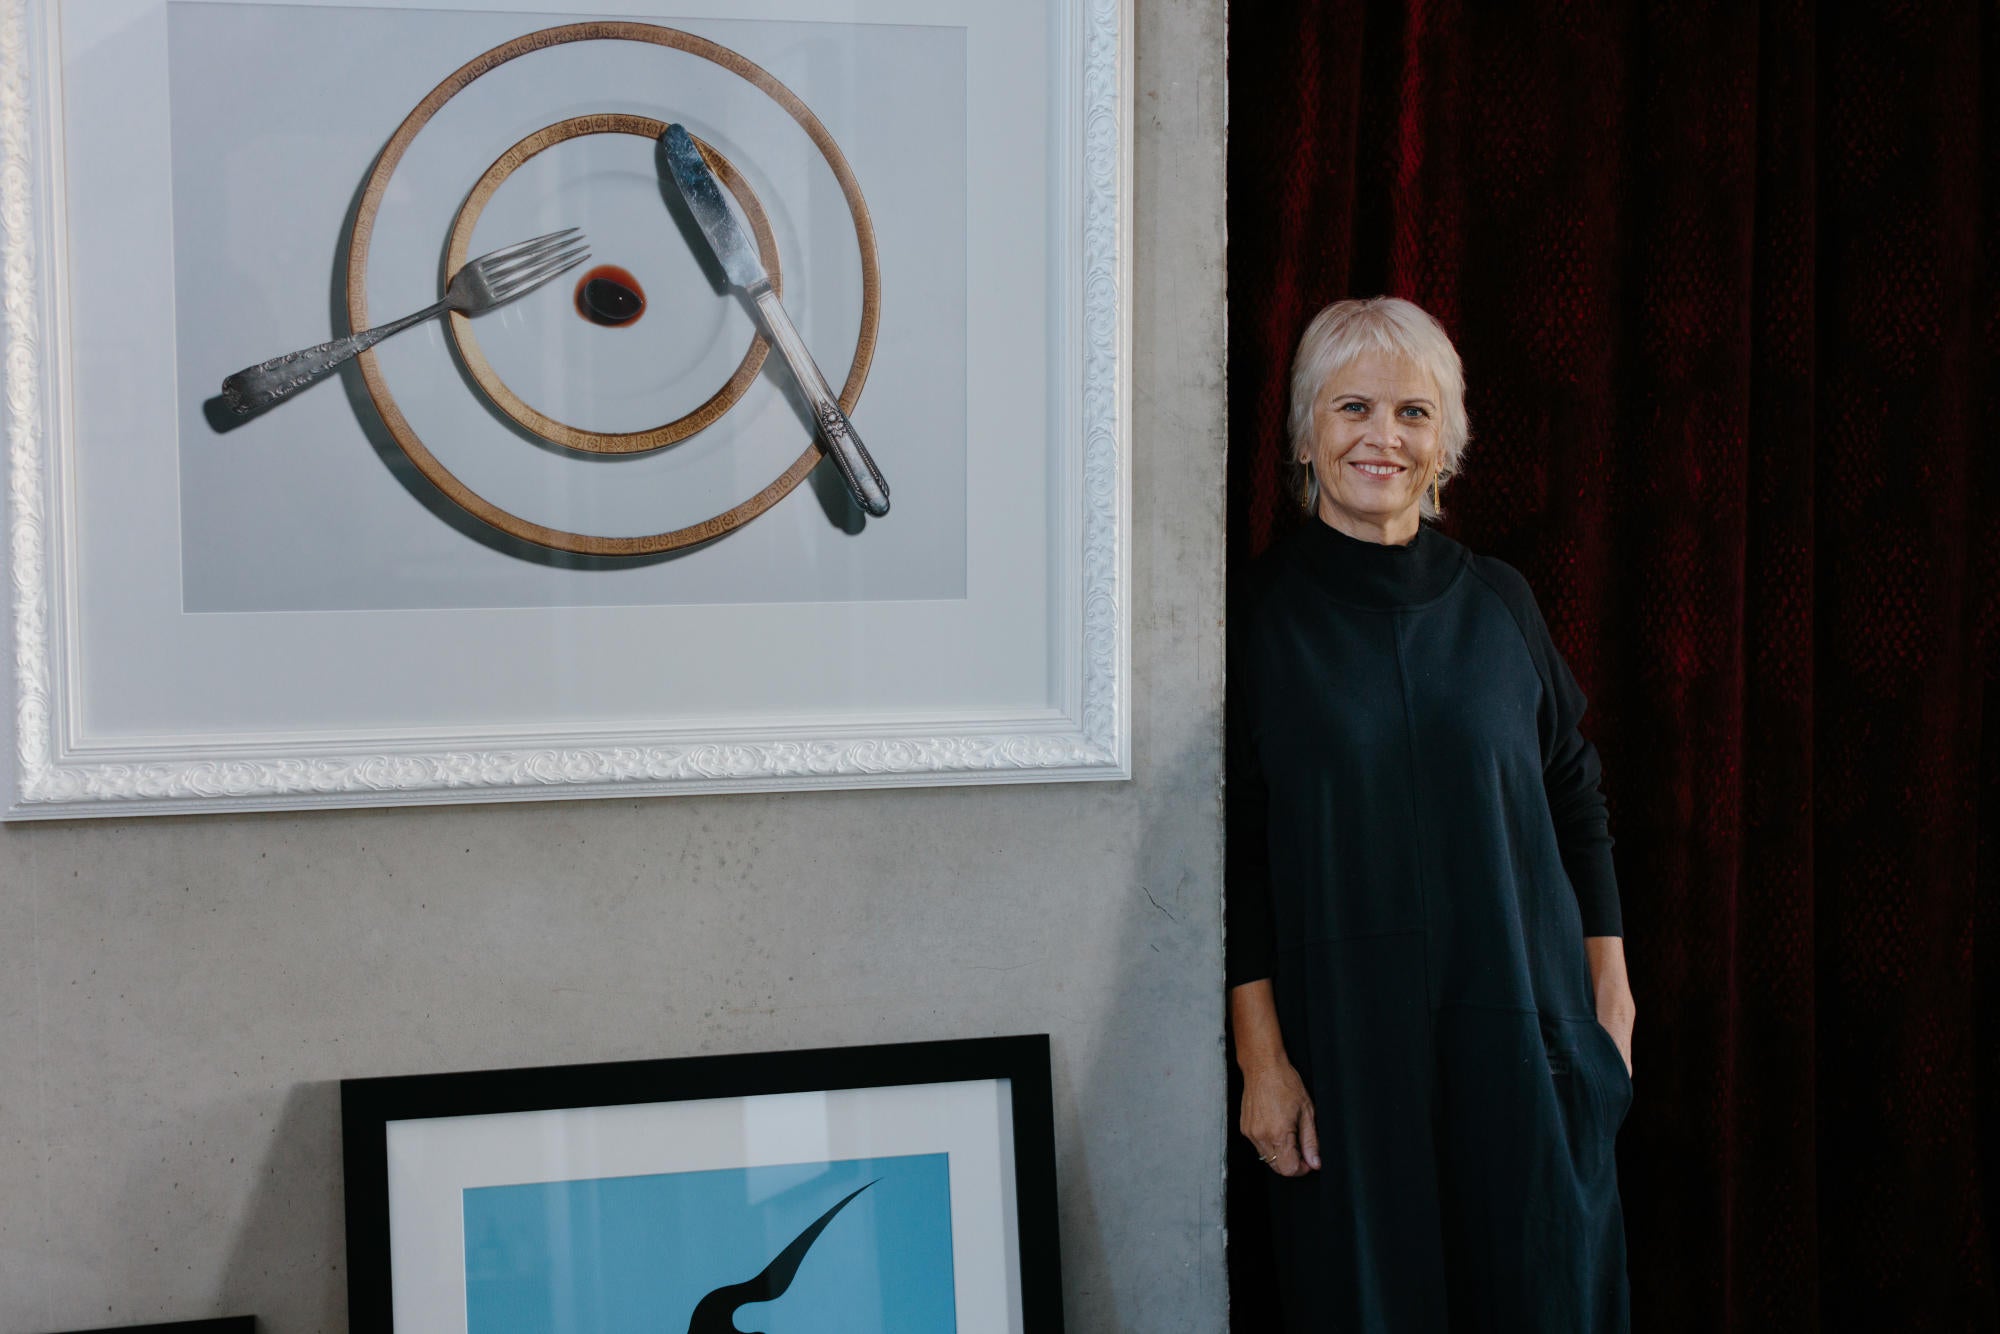 Image of Look founder Jan standing beside a wall with art